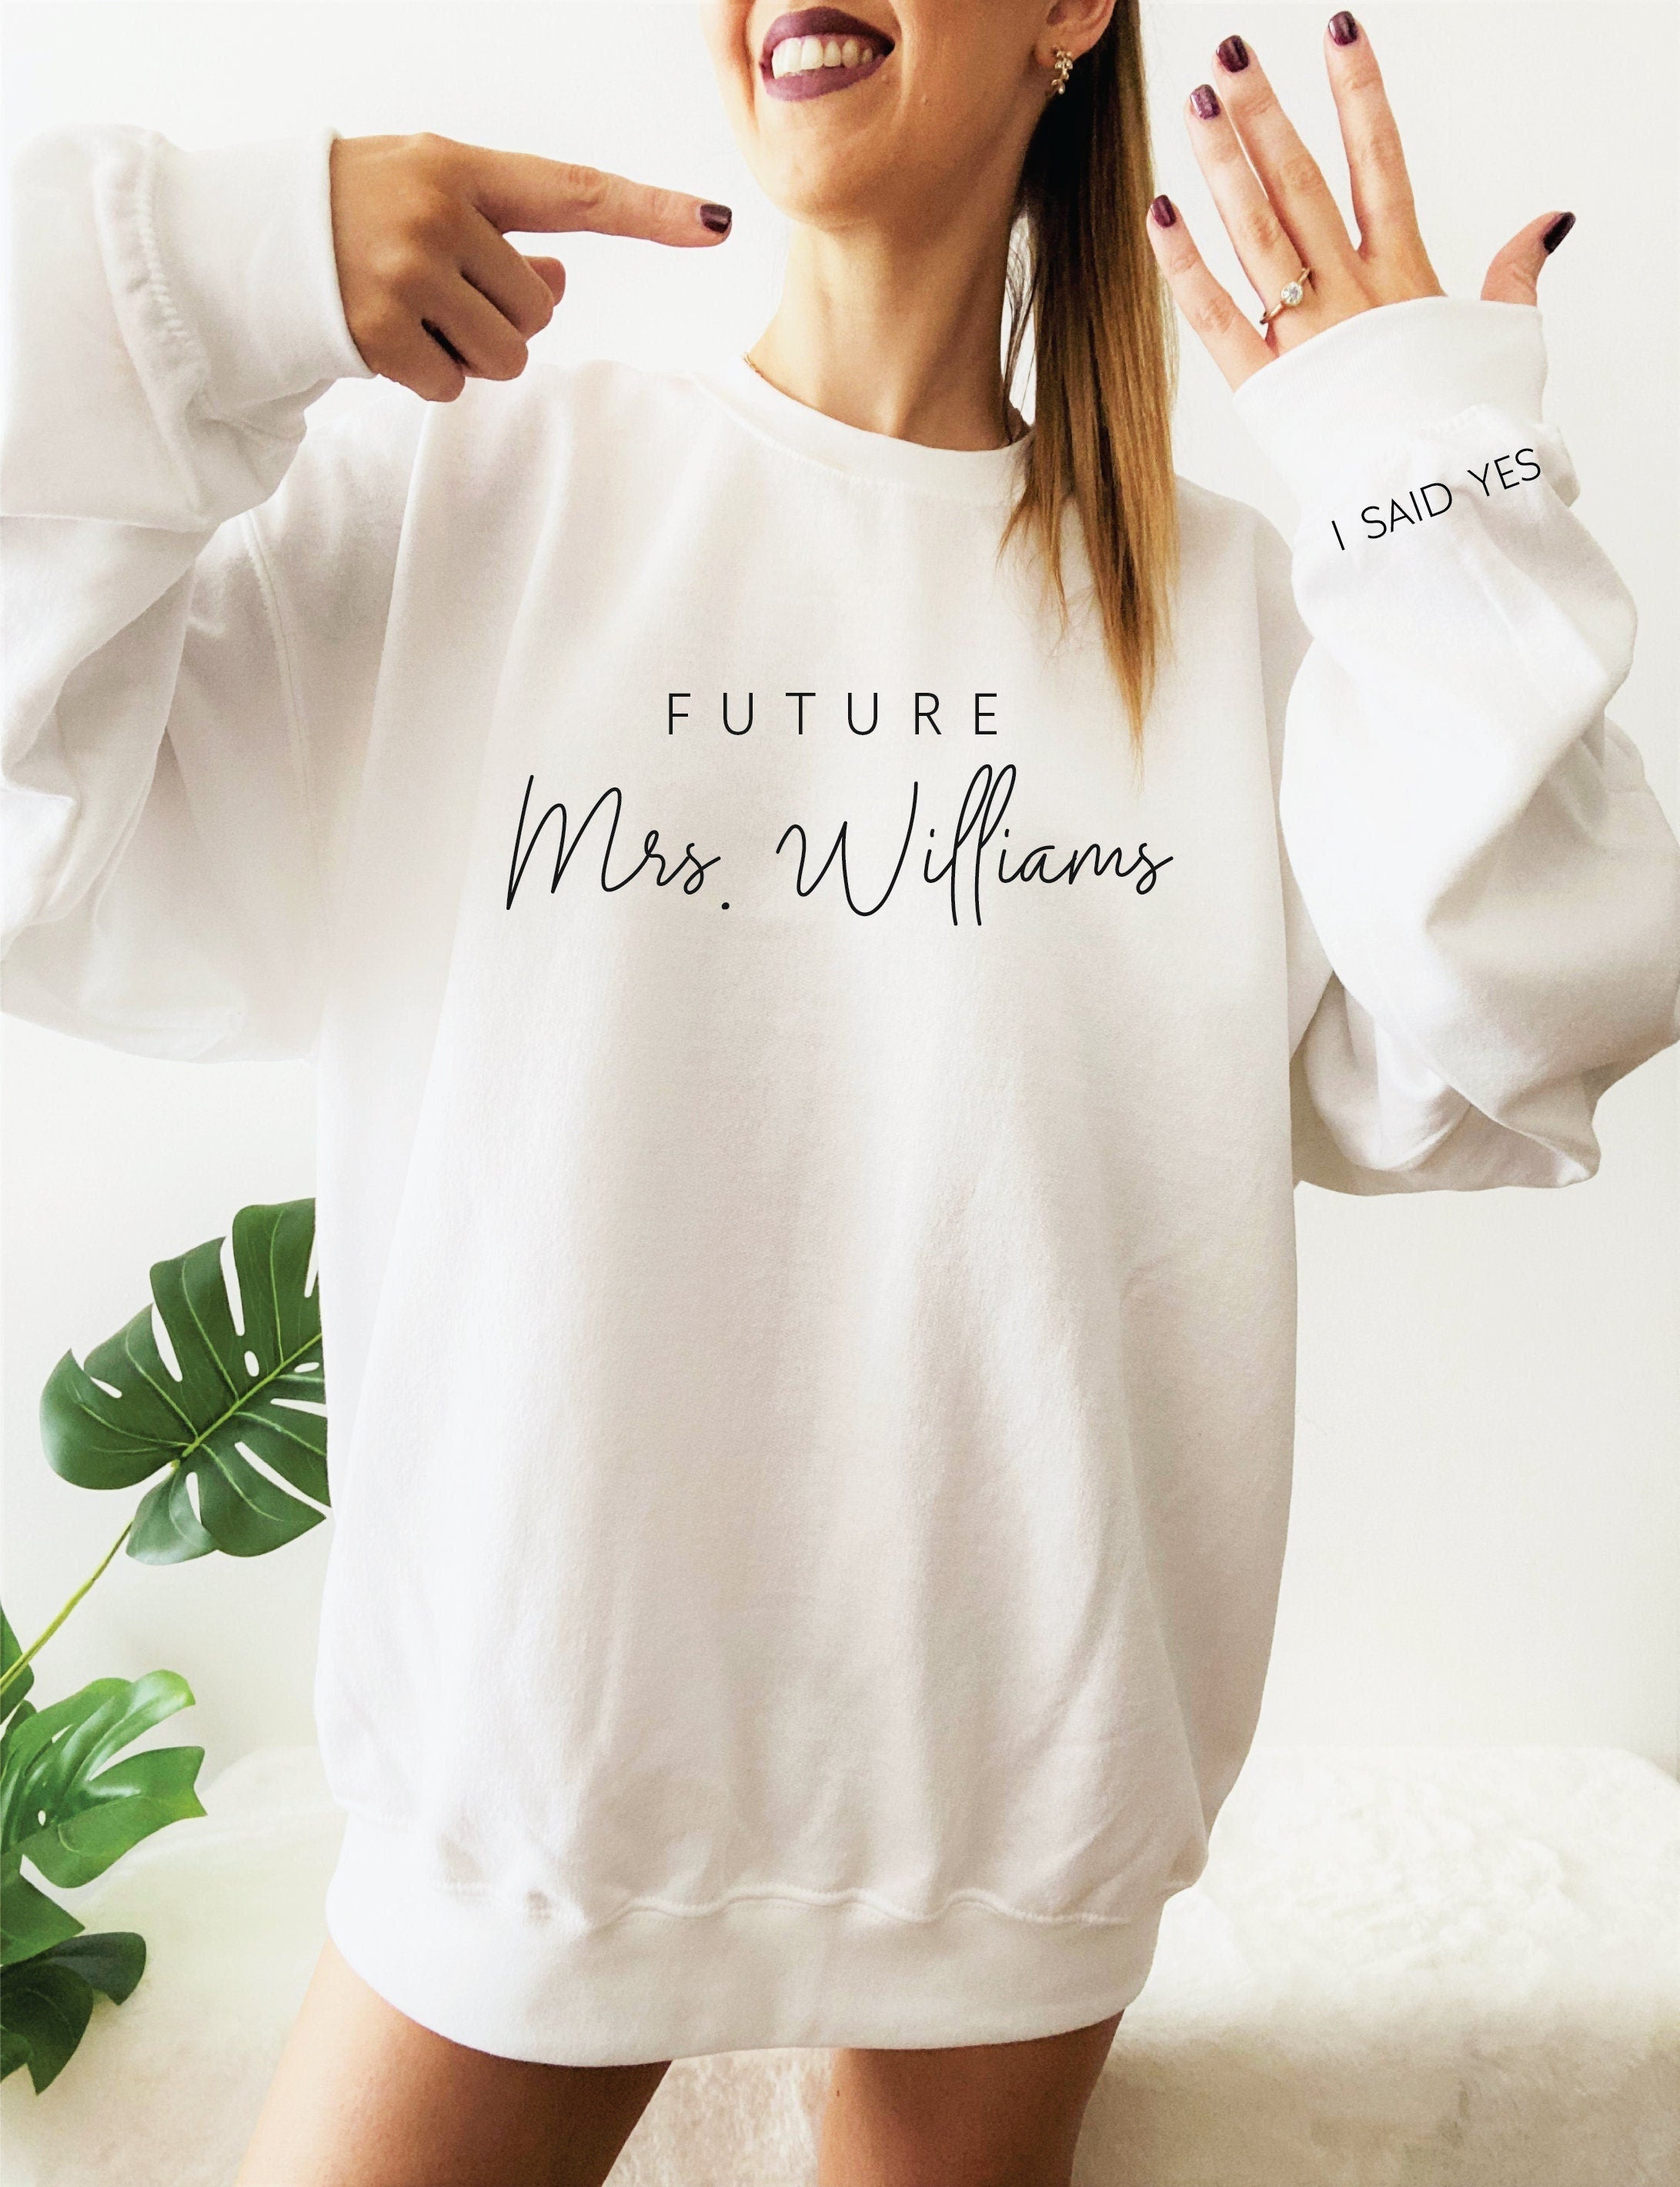 Celebrate Your Journey to 'Mrs.' with Cozy Bride-to-Be Sweatshirts